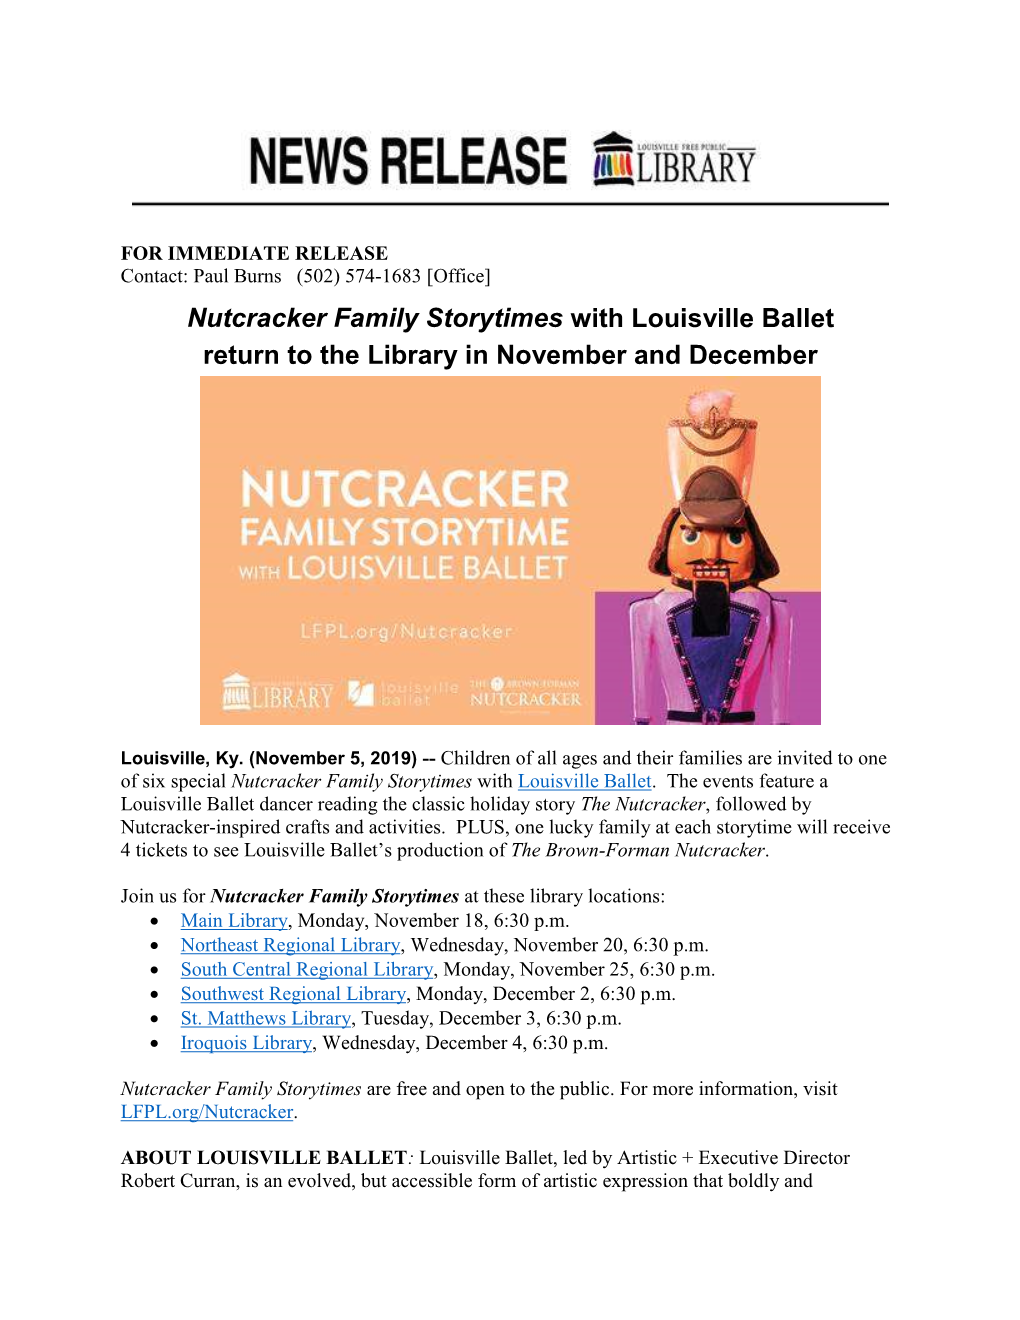 Nutcracker Family Storytimes with Louisville Ballet Return to the Library in November and December